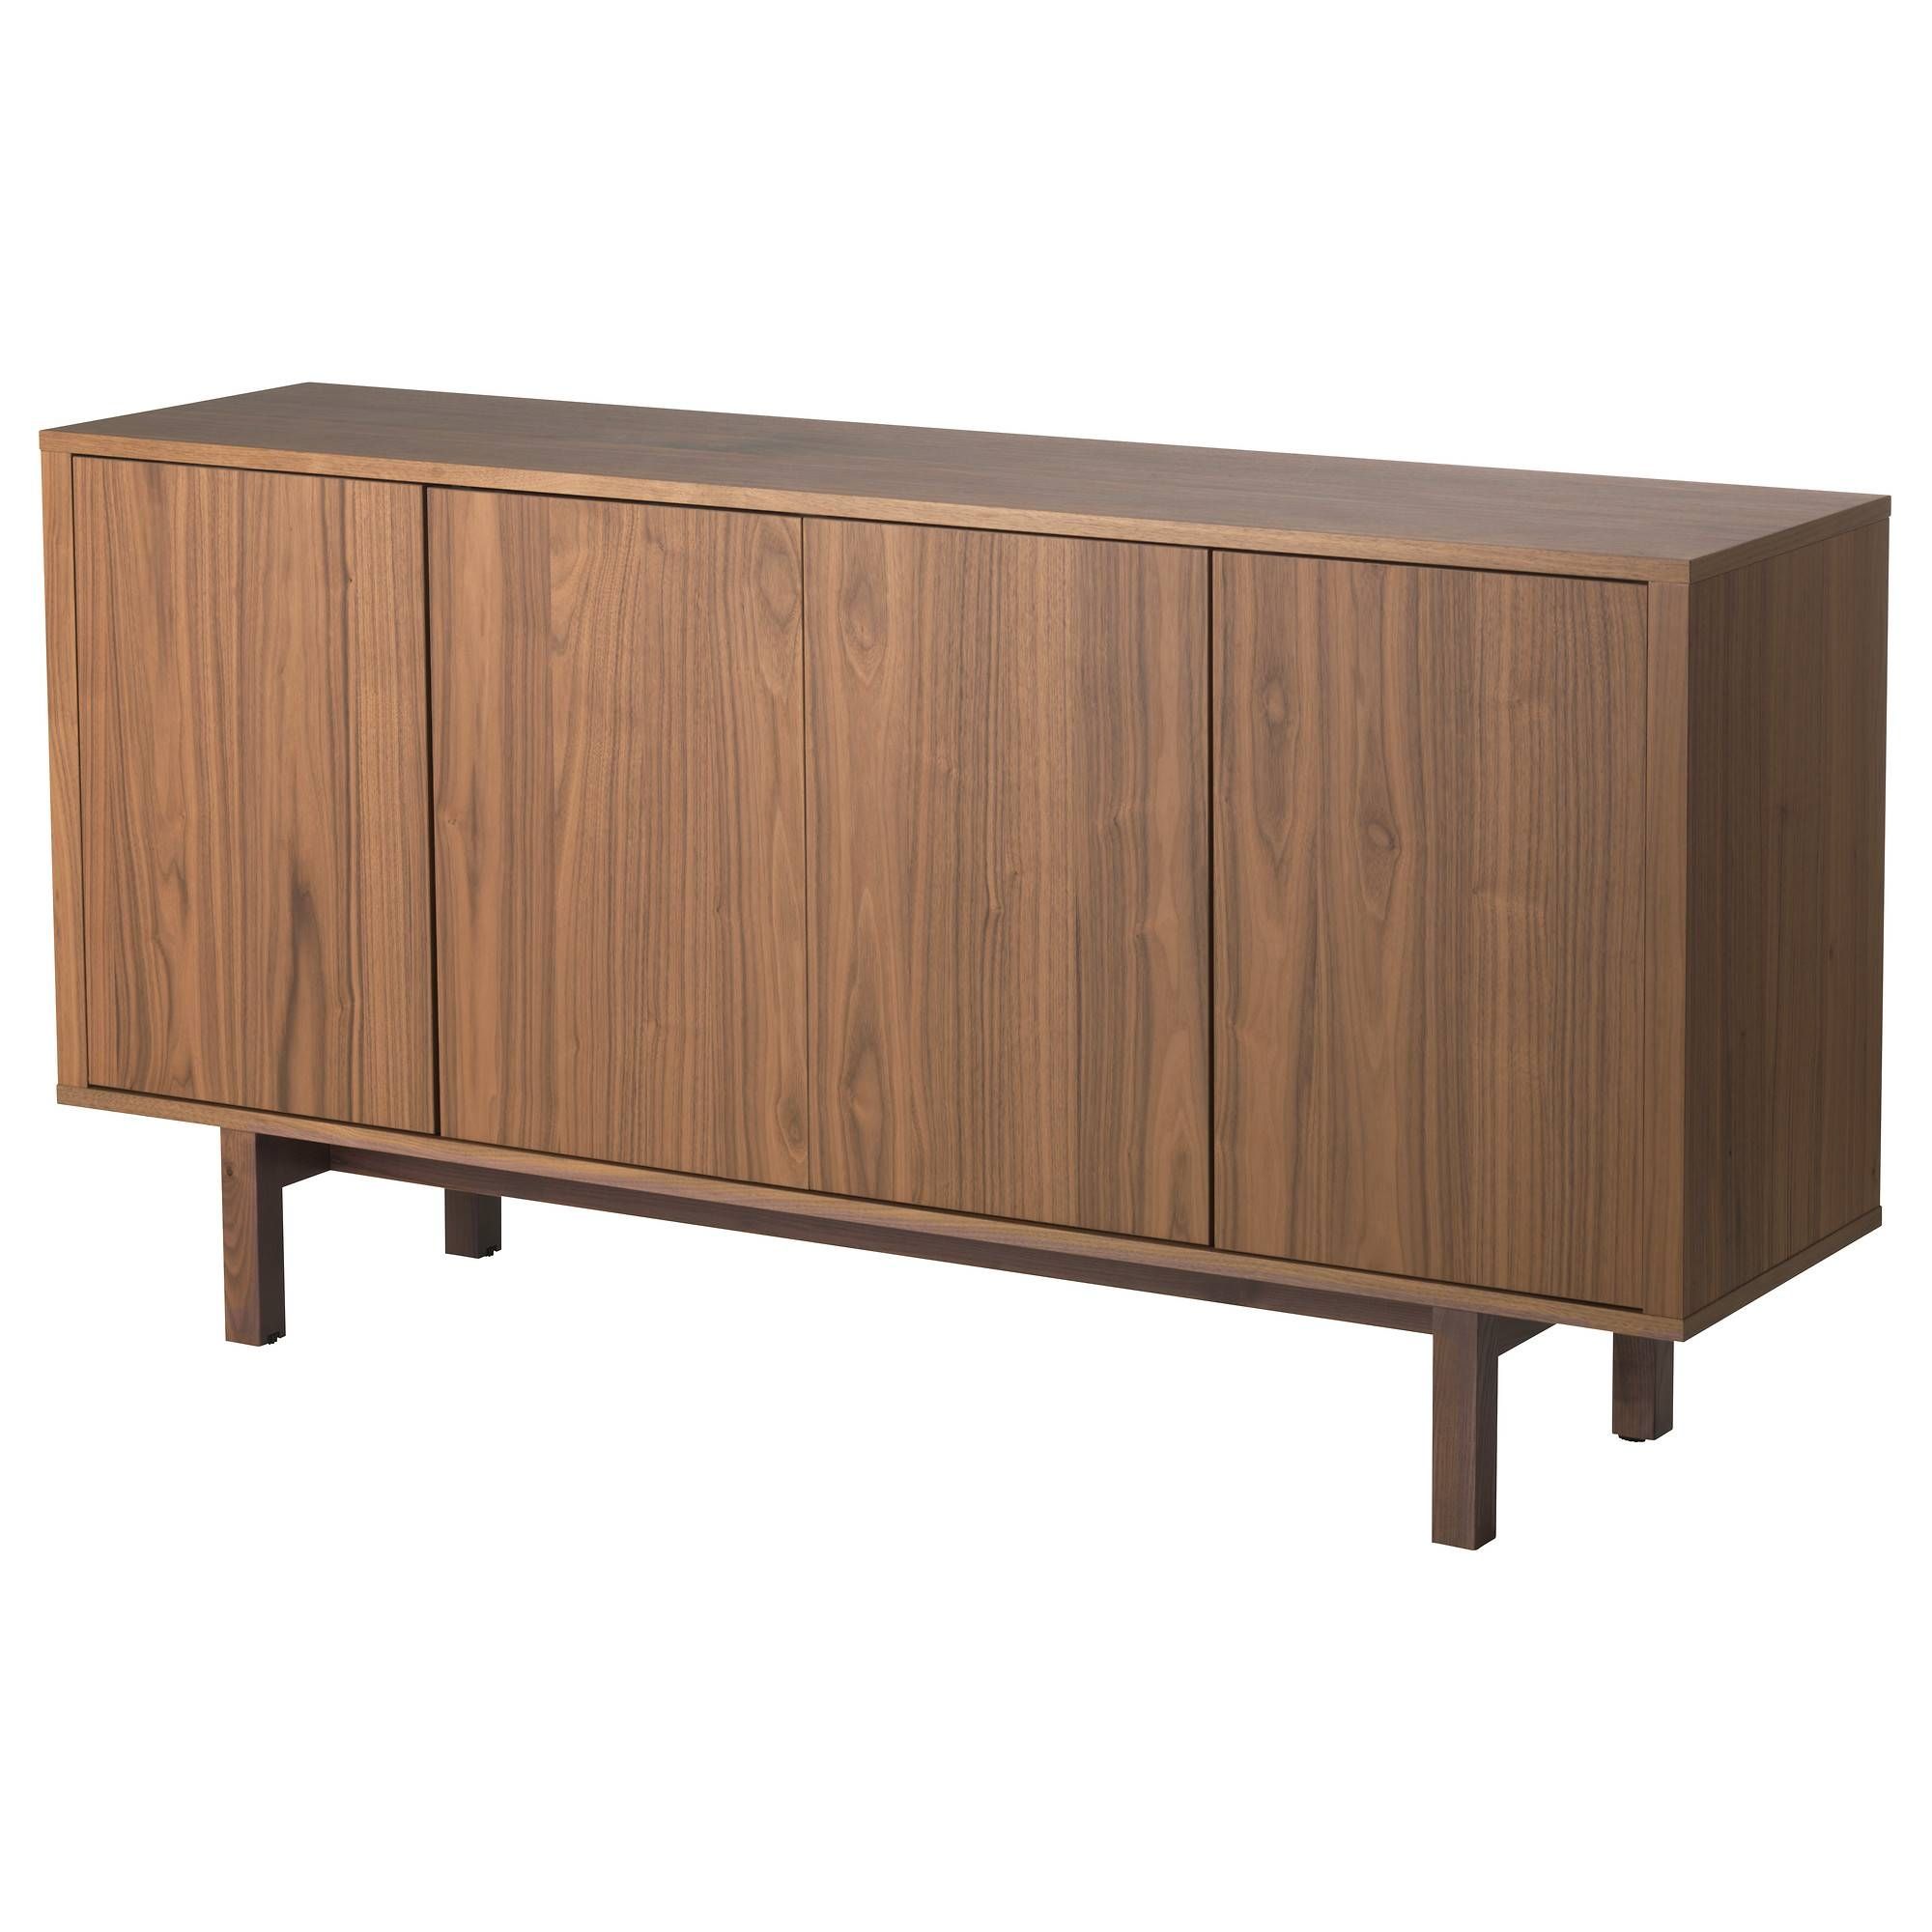 Buffet Tables & Sideboards – Ikea For Most Popular Small Low Sideboards (View 7 of 15)